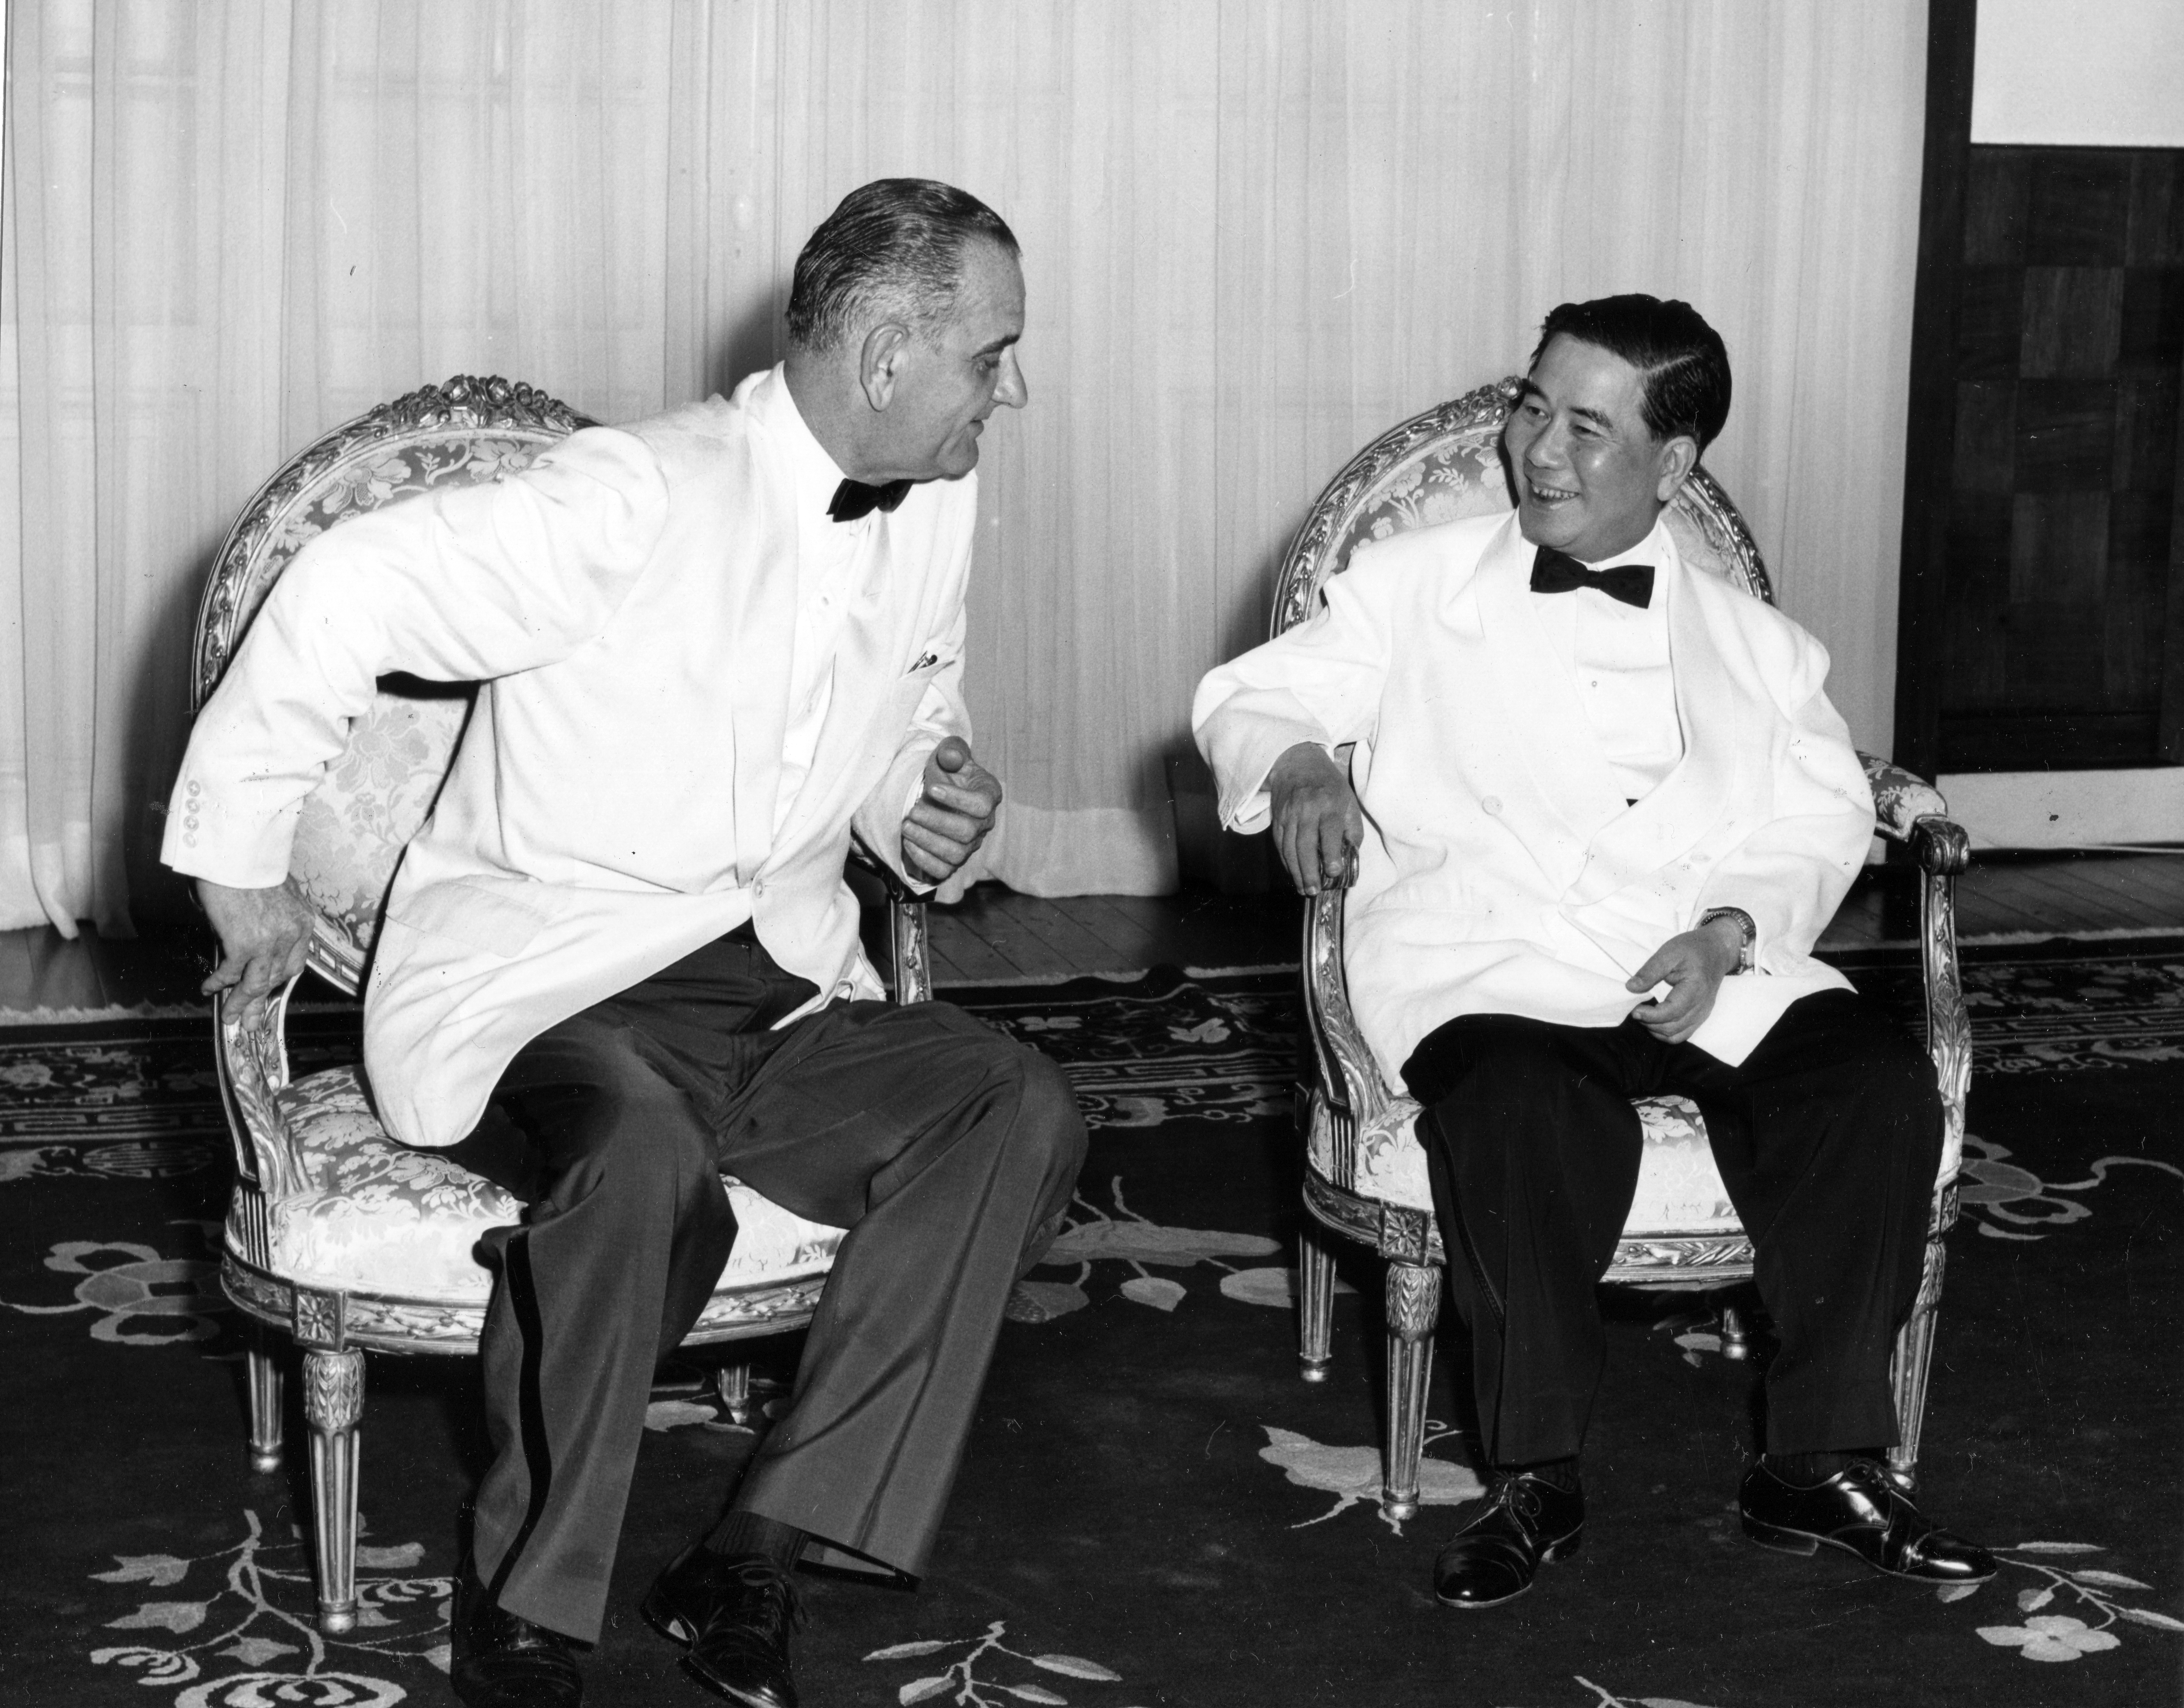 As part of his Goodwill Tour of Southeast Asia, American Vice President Lyndon B Johnson (left) meets with Vietnamese President Ngo Dinh Diem at Independence Palace, Saigon (later Ho Chi Minh City), Vietnam, May 1961.